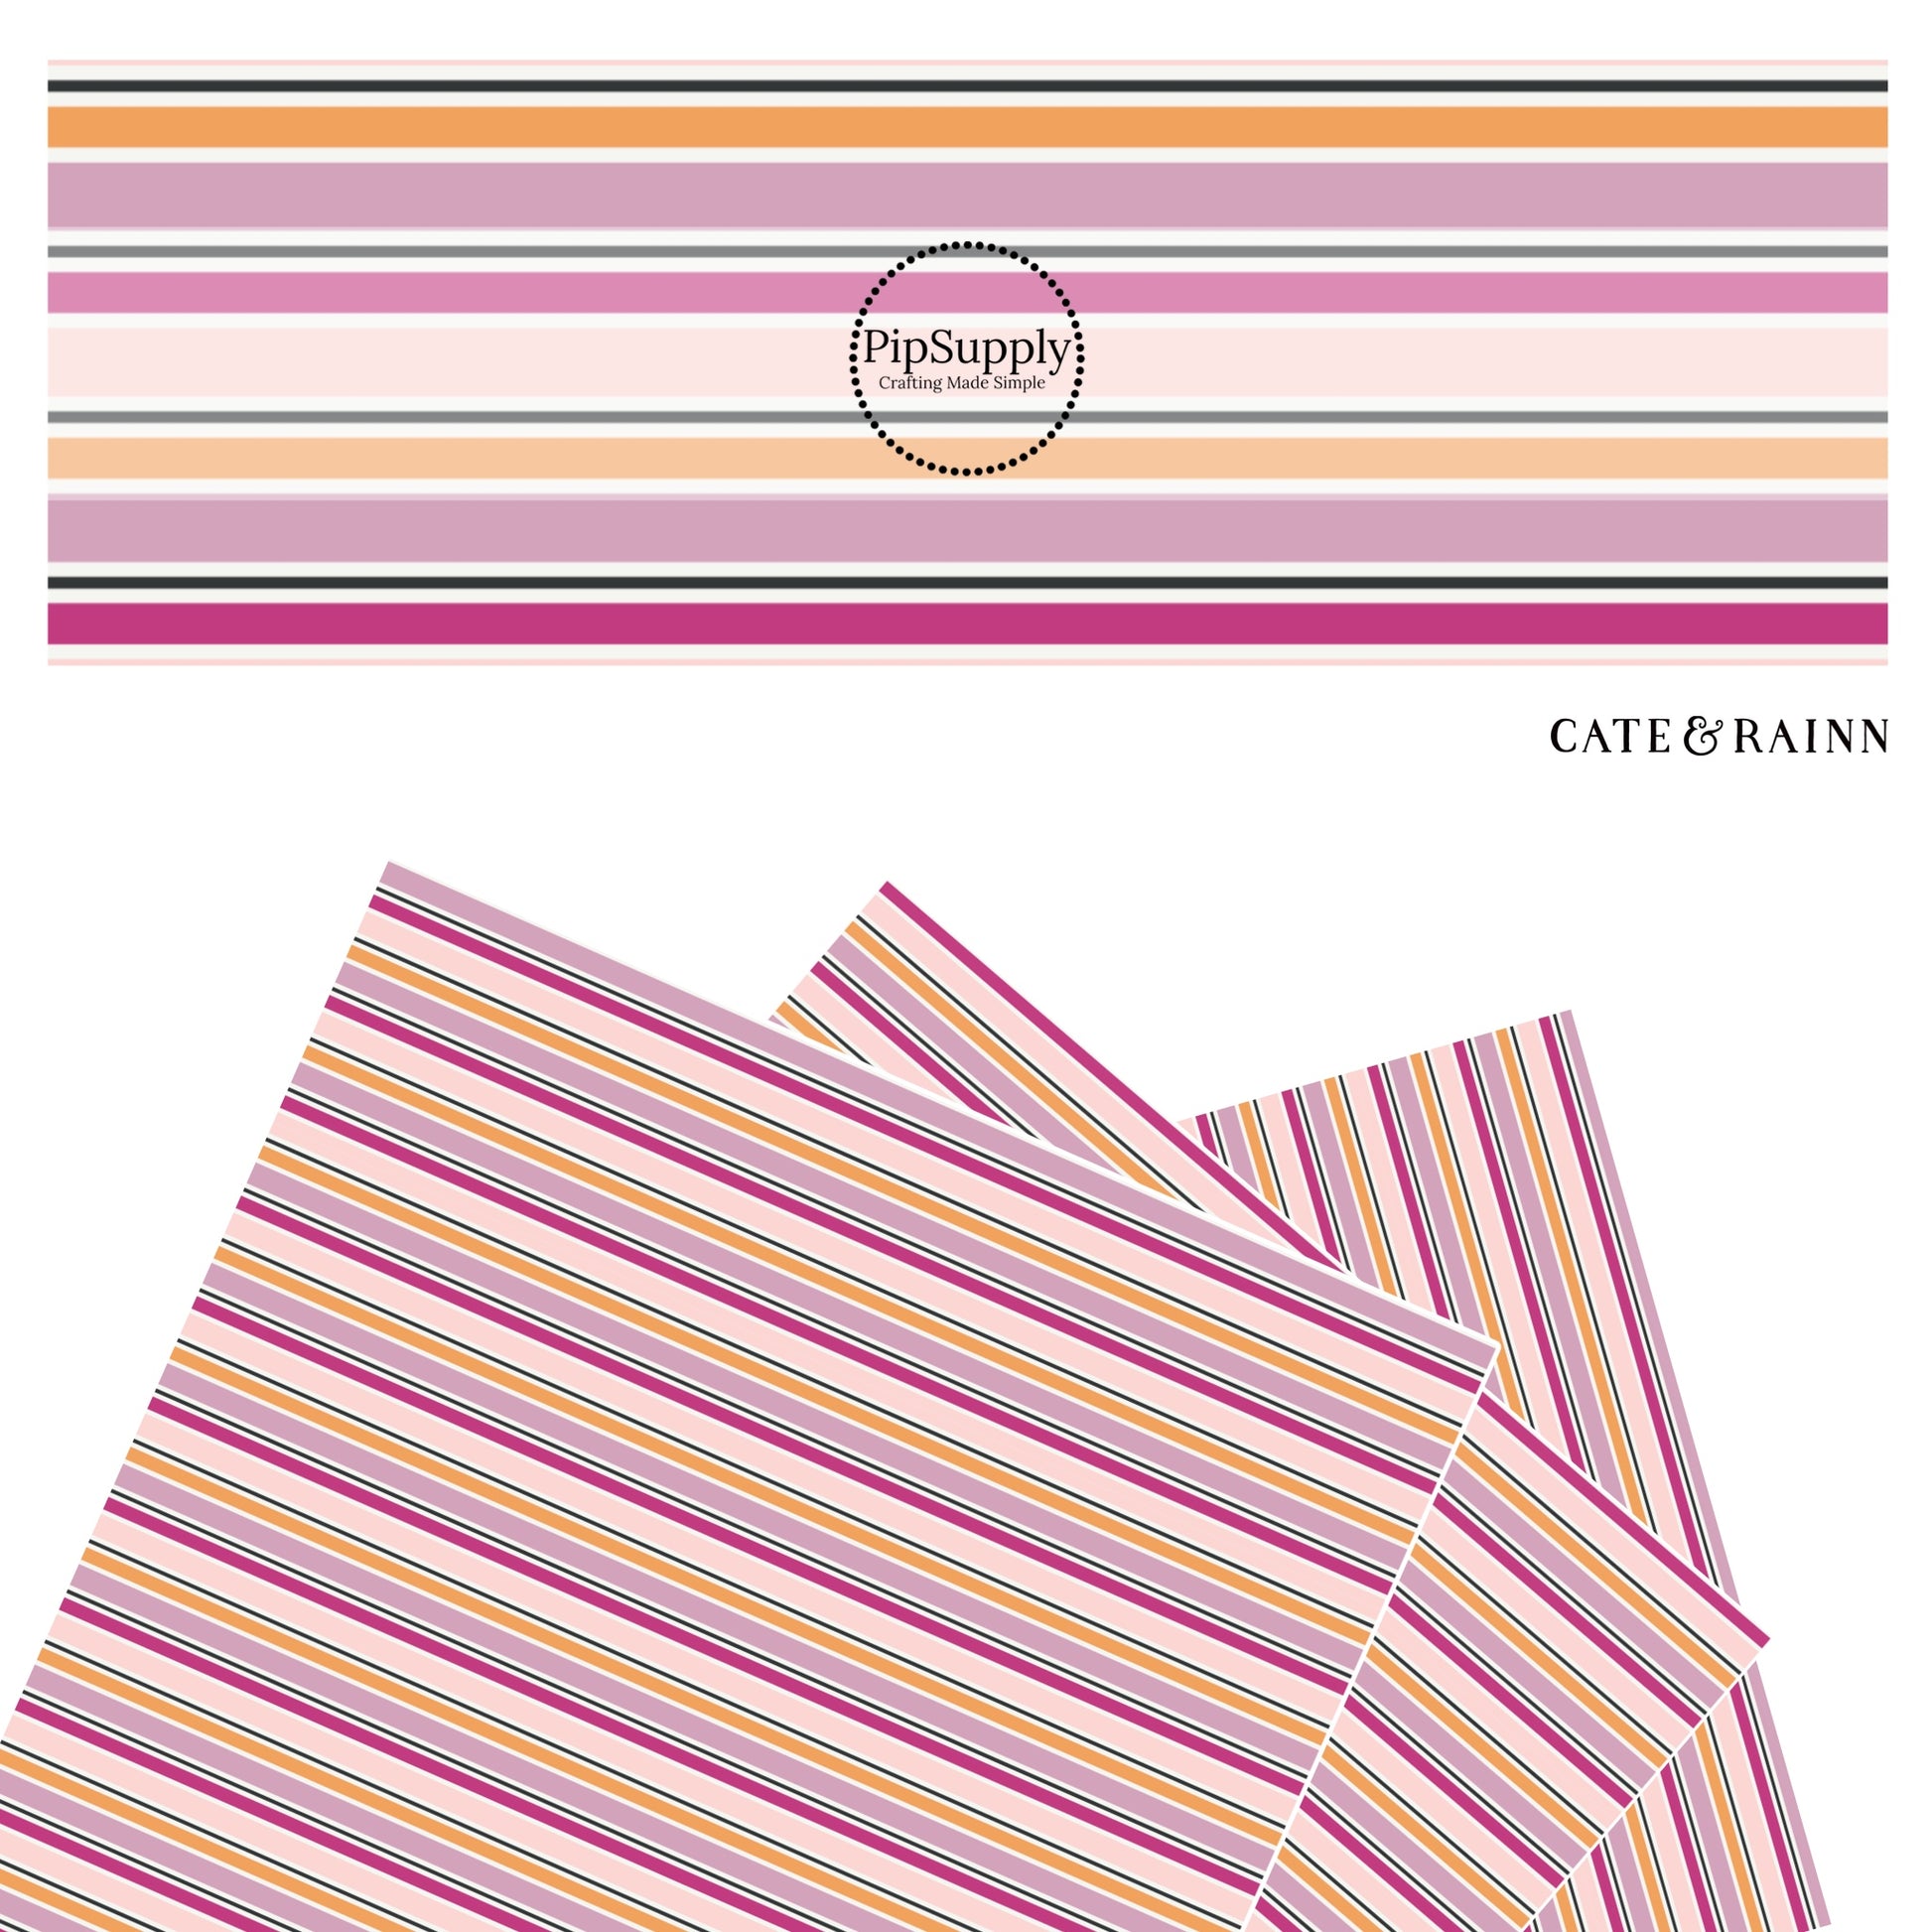 These Halloween stripe theme faux leather sheets contain the following design elements: white, light pink, dark pink, black, and orange stripes. Our CPSIA compliant faux leather sheets or rolls can be used for all types of crafting projects.